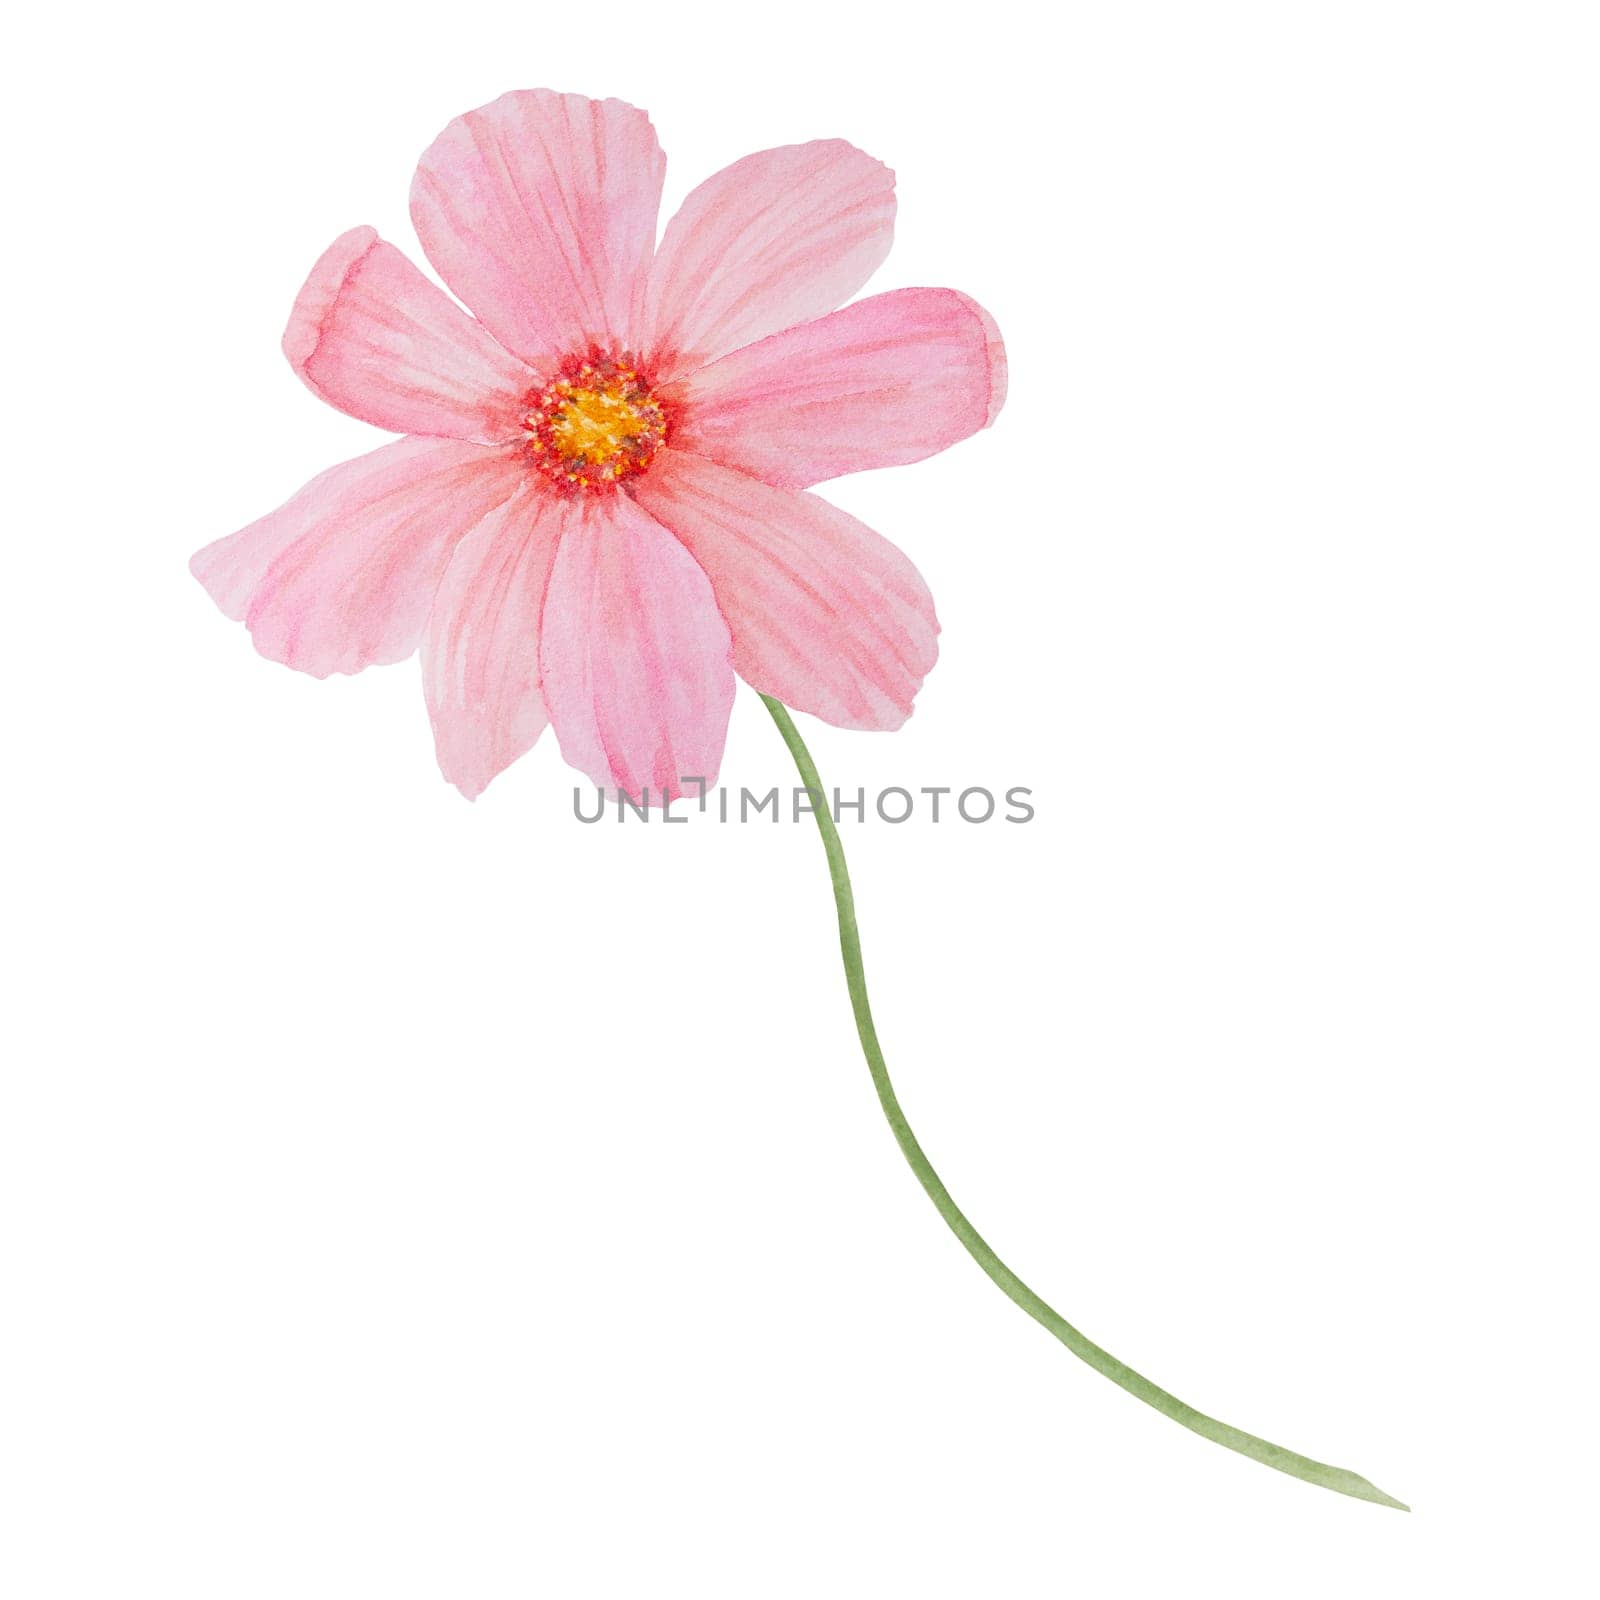 Garden pink Cosmos watercolor illustration. Hand drawn botanical painting, floral sketch. Colorful preety flower clipart for summer or autumn design of wedding invitation, prints, greetings, sublimation, textile